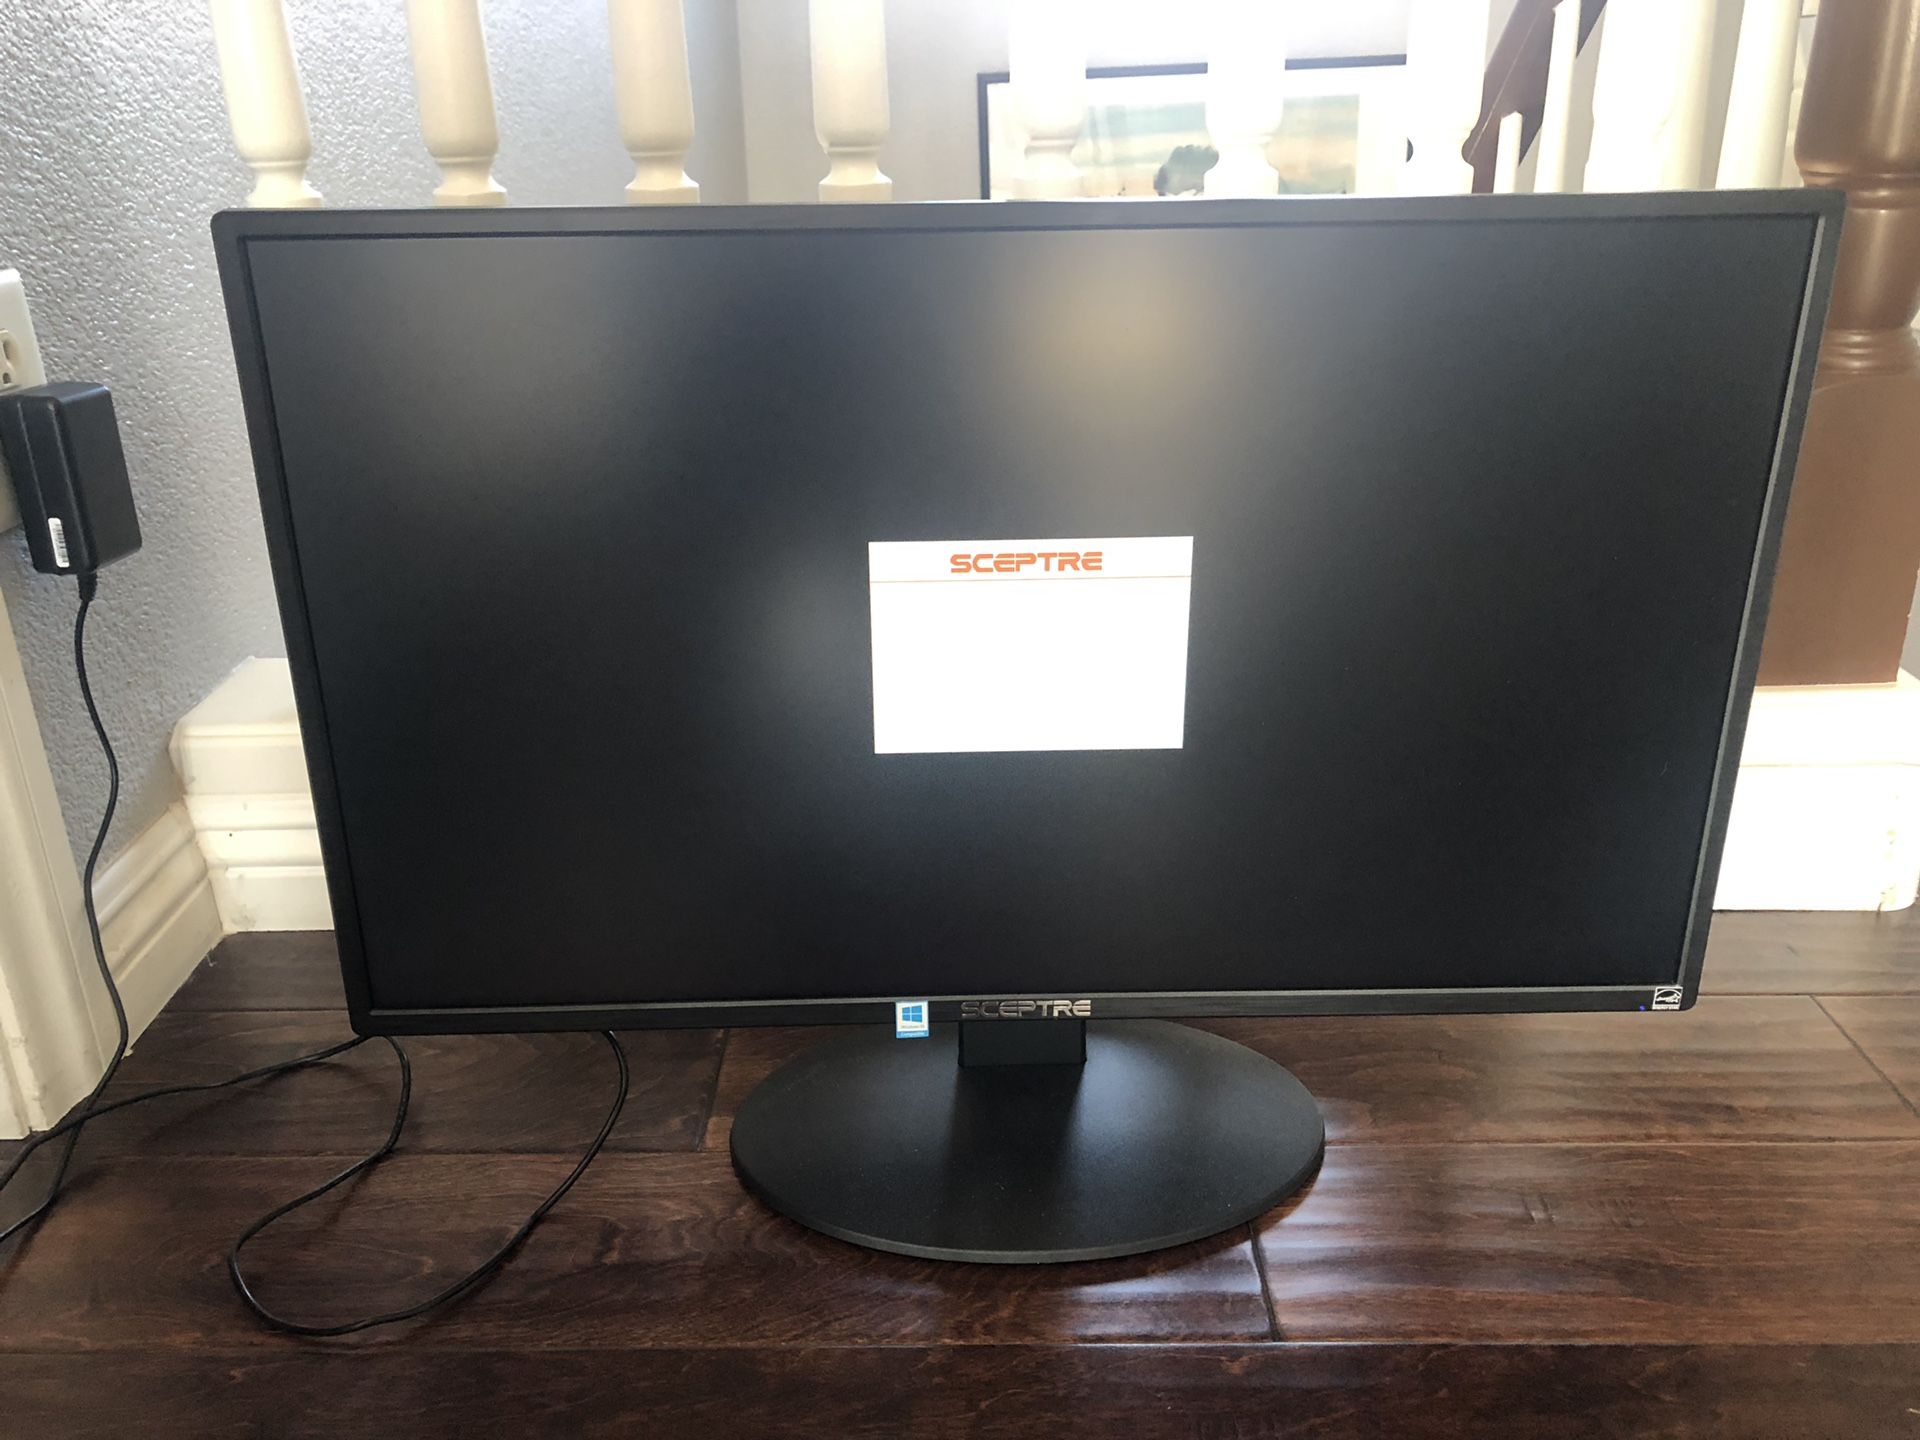 Spectre 27 Inch Gaming Monitor